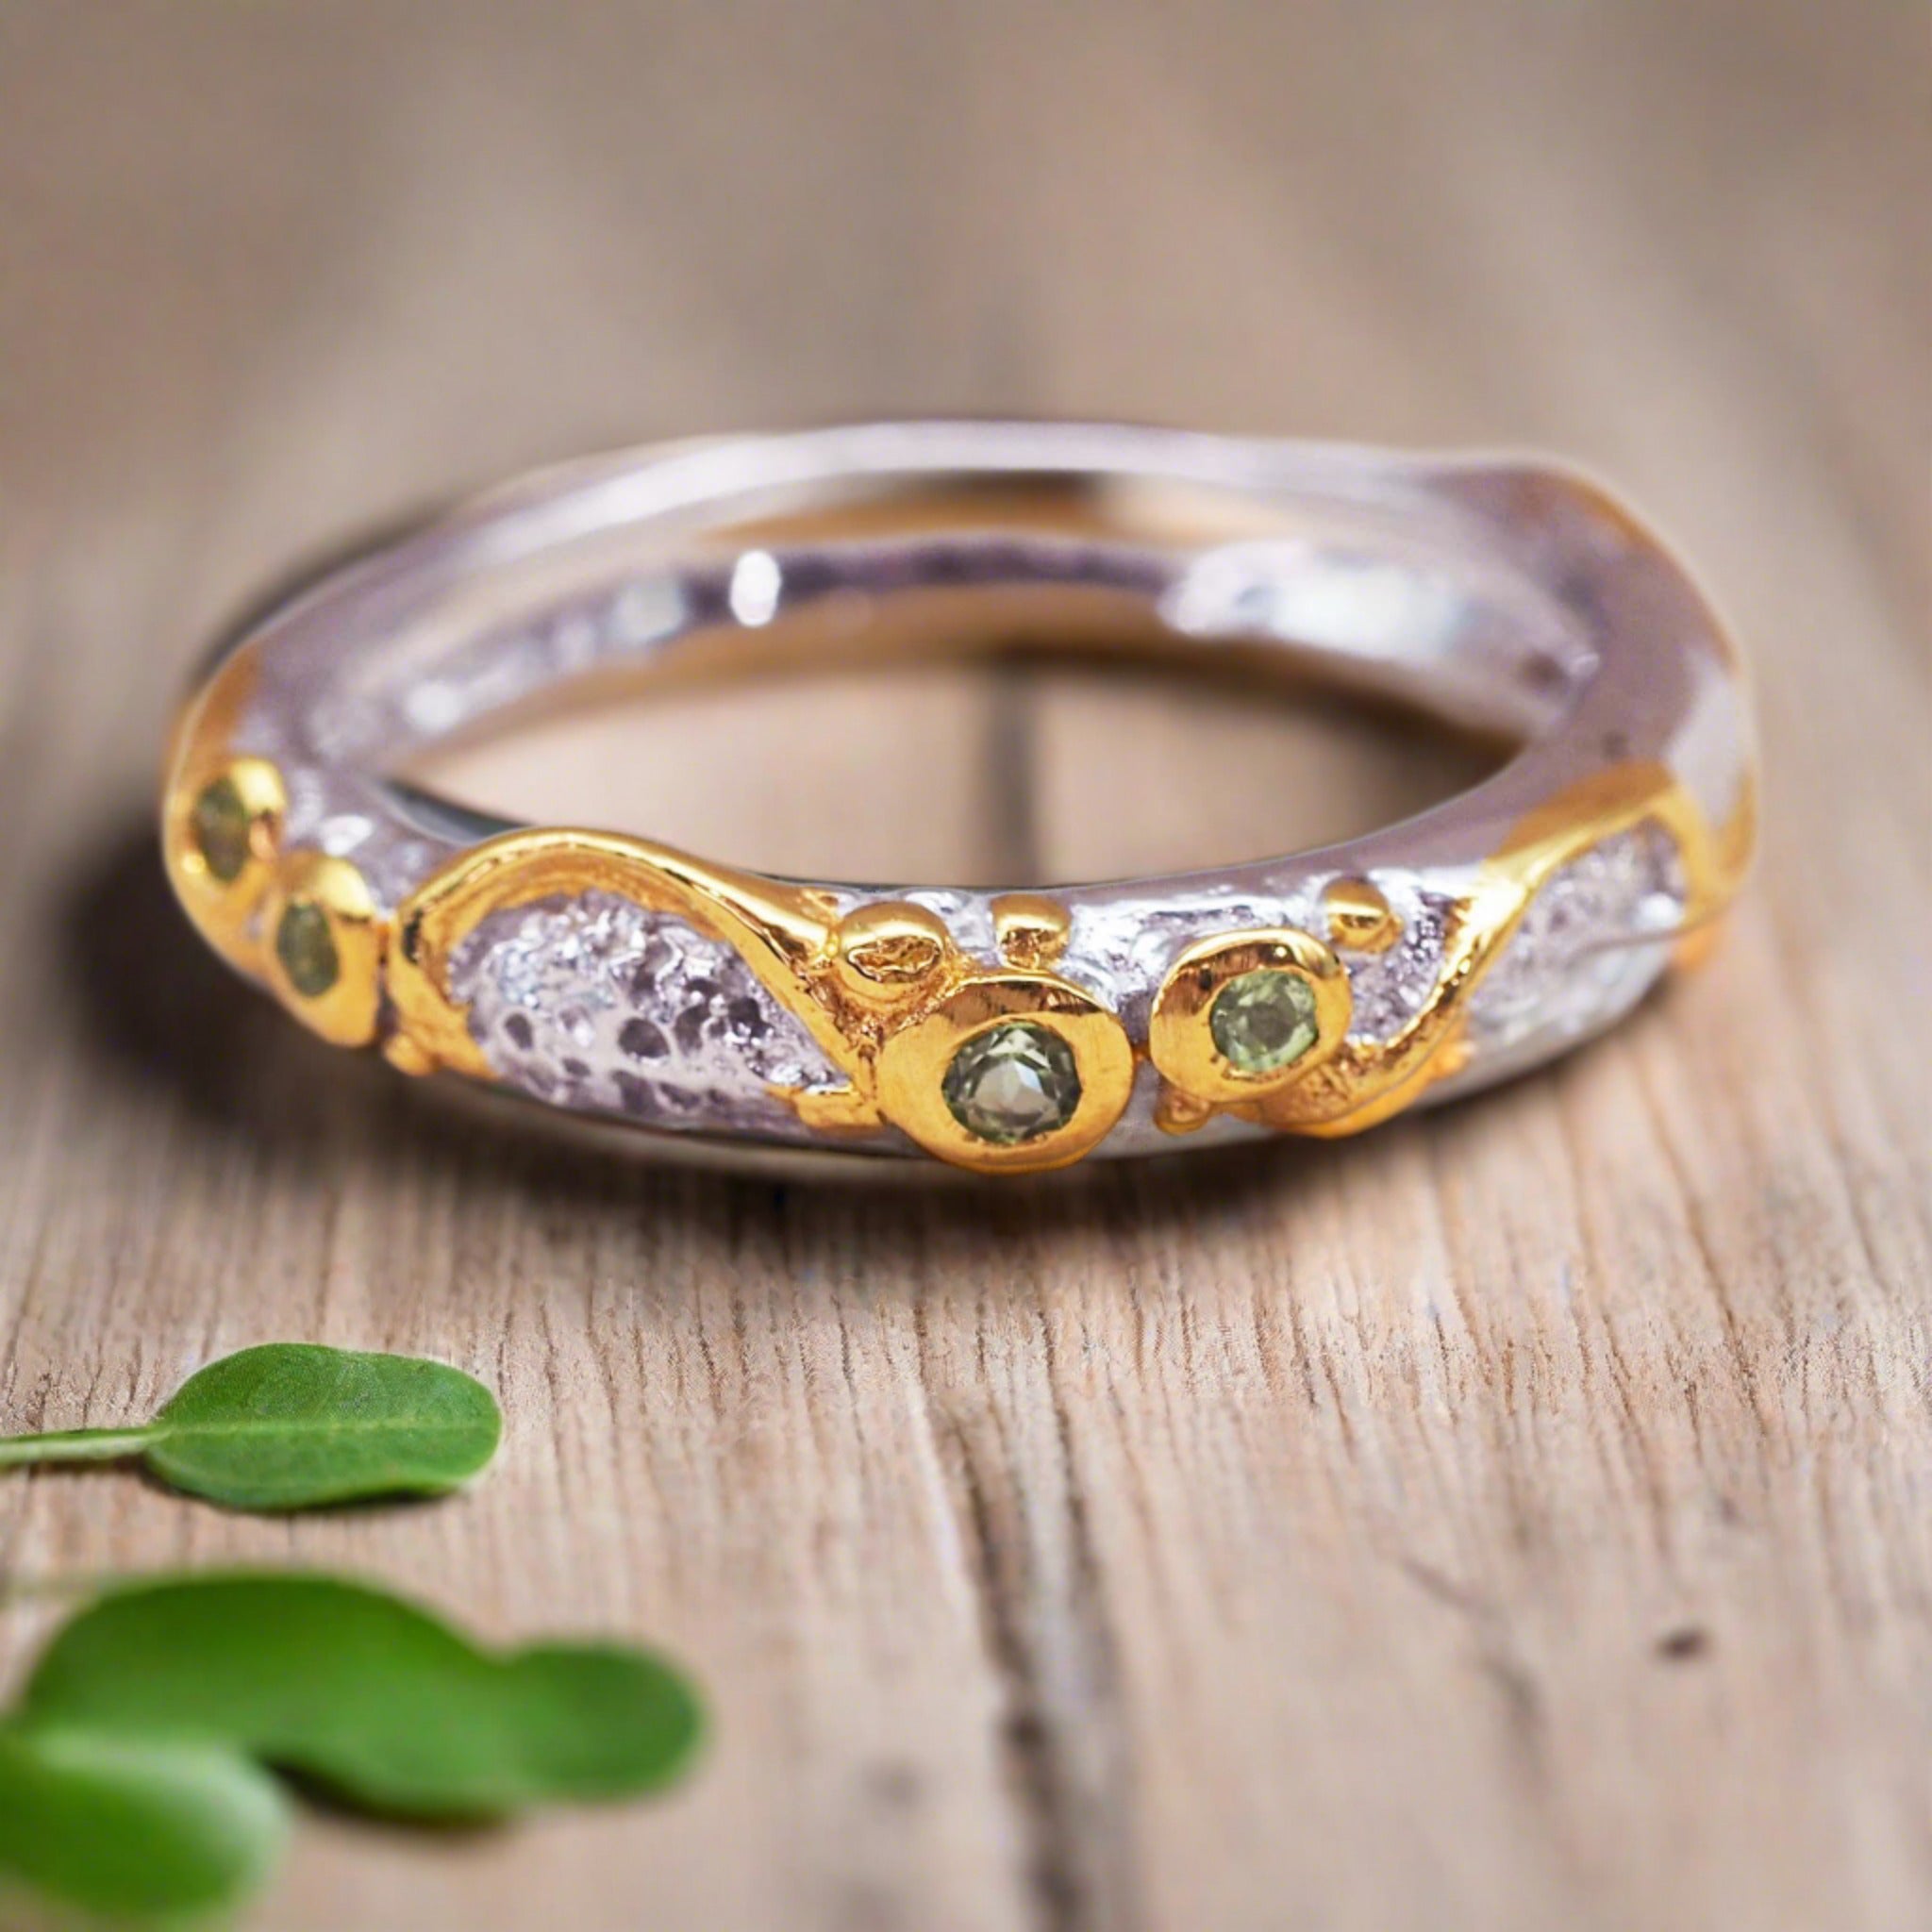 Bespoke Peridot Silver and Gold Ring - womens jewellery by indie and harper